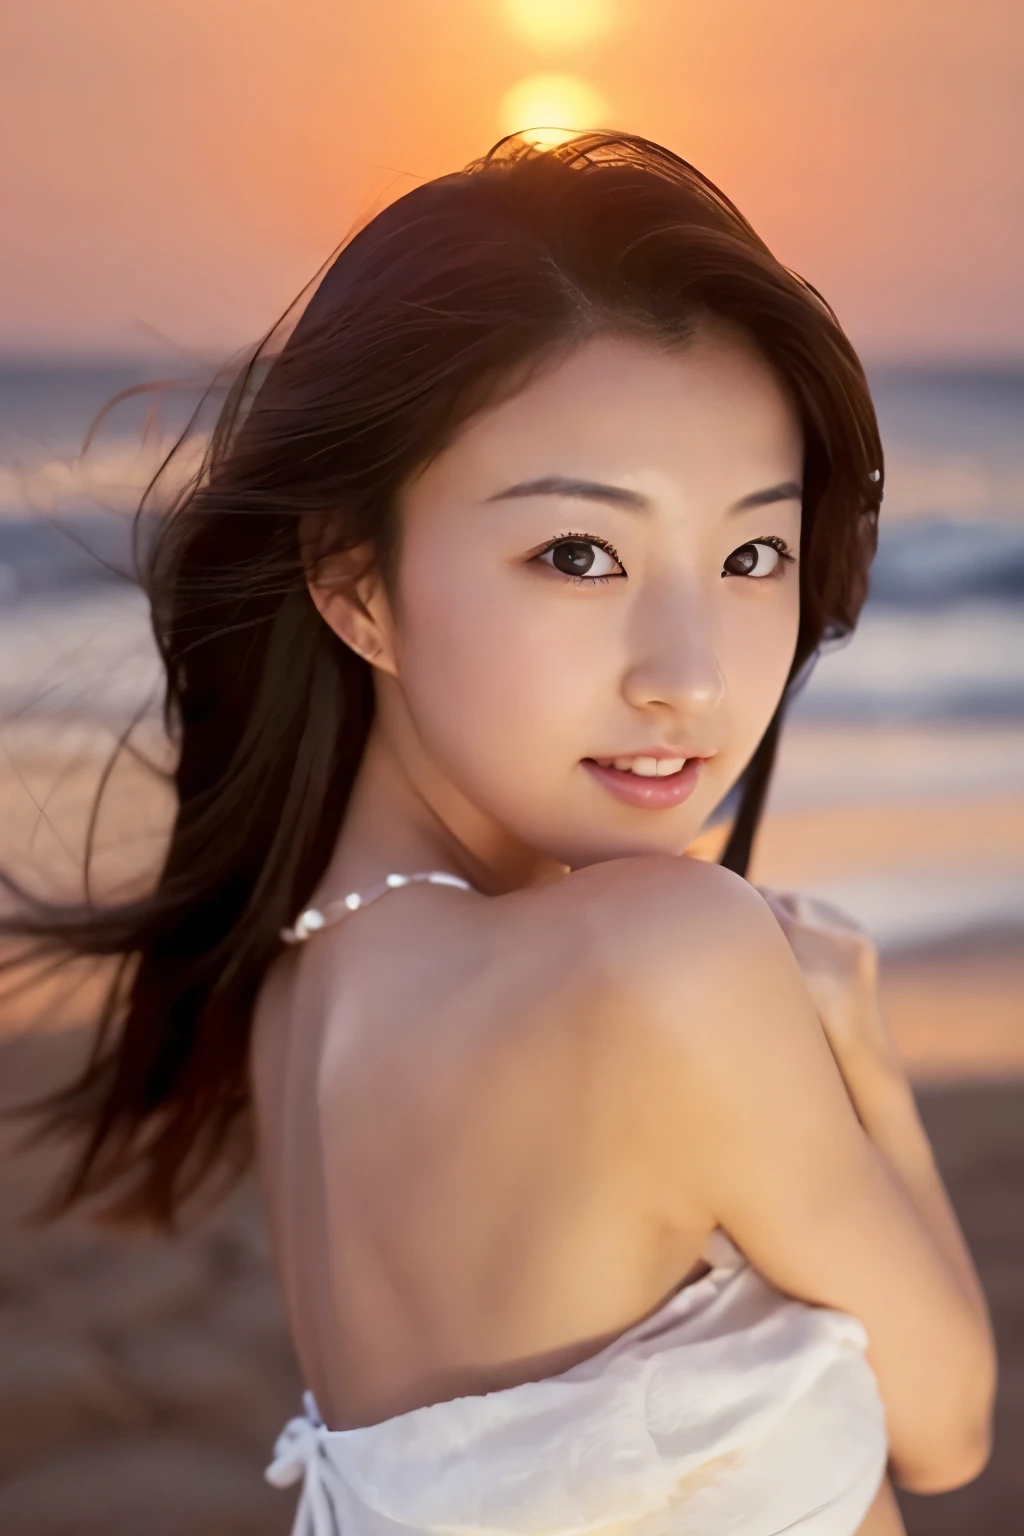 Create a high-quality, hyper-realistic portrait of a very beautiful Japanese idol. She is wearing a clean white summer dress and is squatting on the beach during sunset at sea. The deep indigo of the night sky contrasts with the last vestiges of crimson near the horizon, with swaying waves in the background. The girl has semi-long hair and a slender body with small breasts. The photo should capture her with detailed eyes, a detailed face, and a beautiful, sophisticated nose. The image should have a realistic, delicate, and finely detailed quality, suitable for a fashion magazine cover. Use cinema lighting and soft light to enhance her features. Ensure the photo is of the highest quality, with a resolution of 8K, making it perfect for a 2K wallpaper.